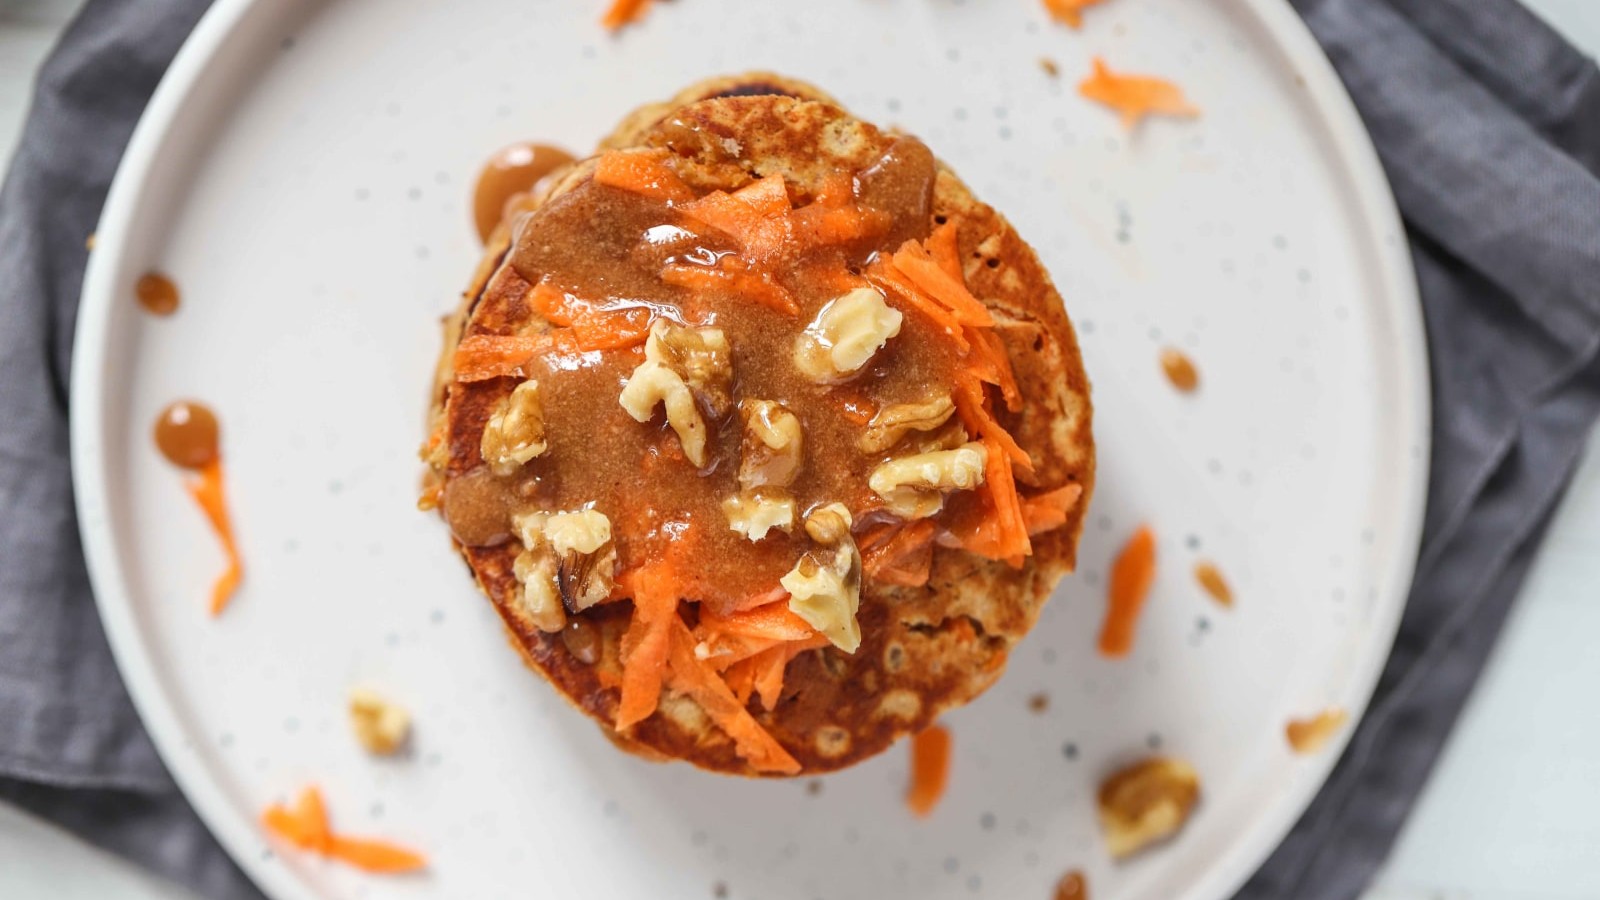 Image of Carrot Pancakes With Almond Caramel